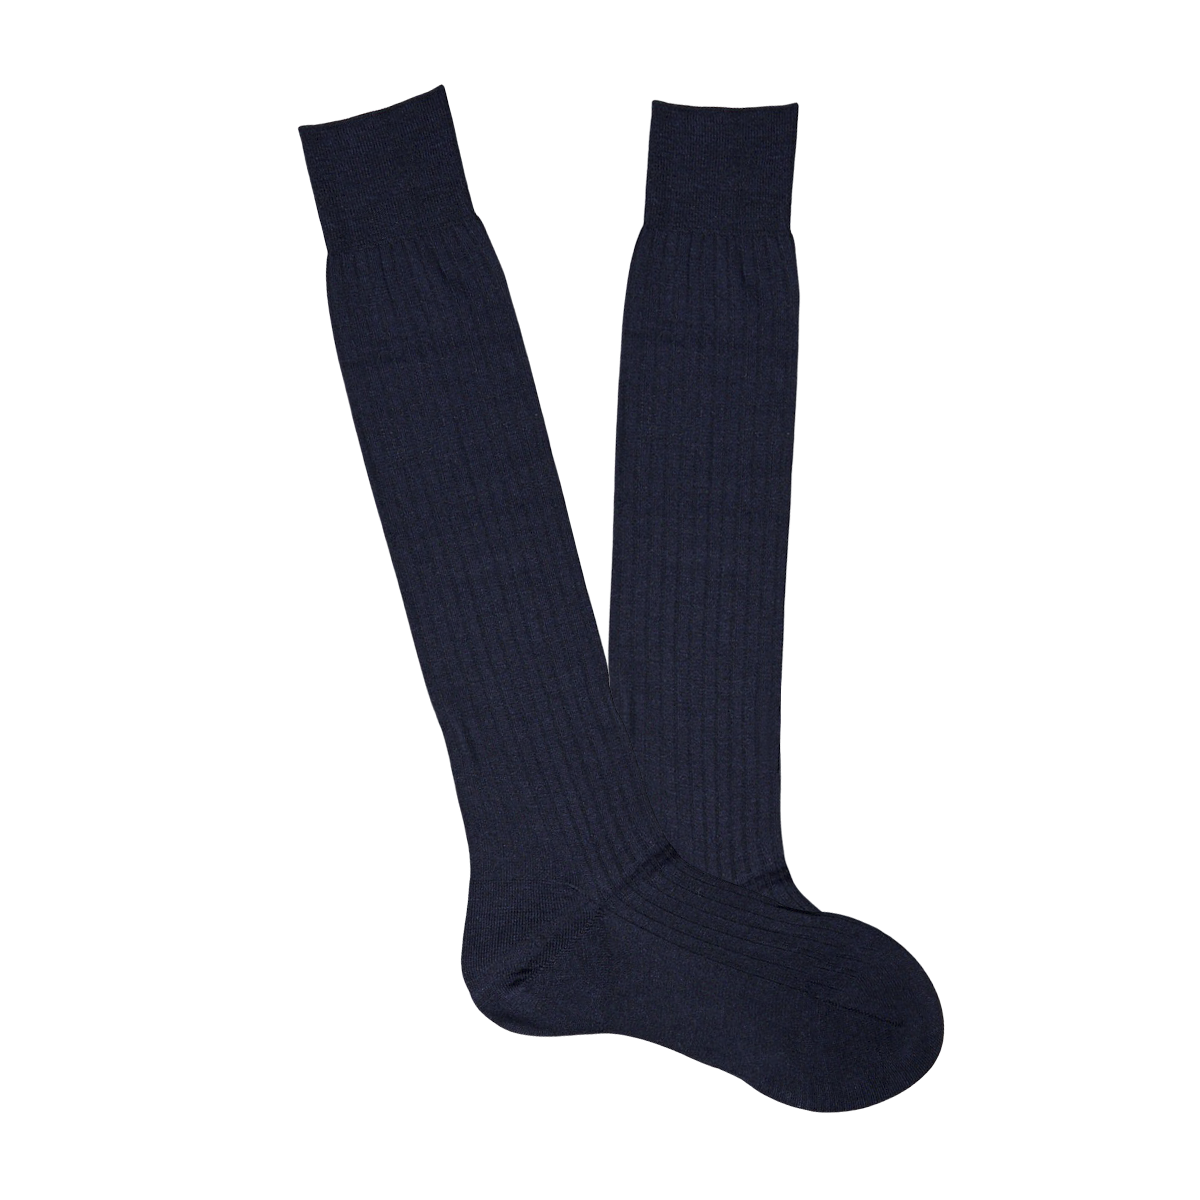 Comfortable Navy Merino Wool Ribbed Knee Socks made by Pantherella on a white background.